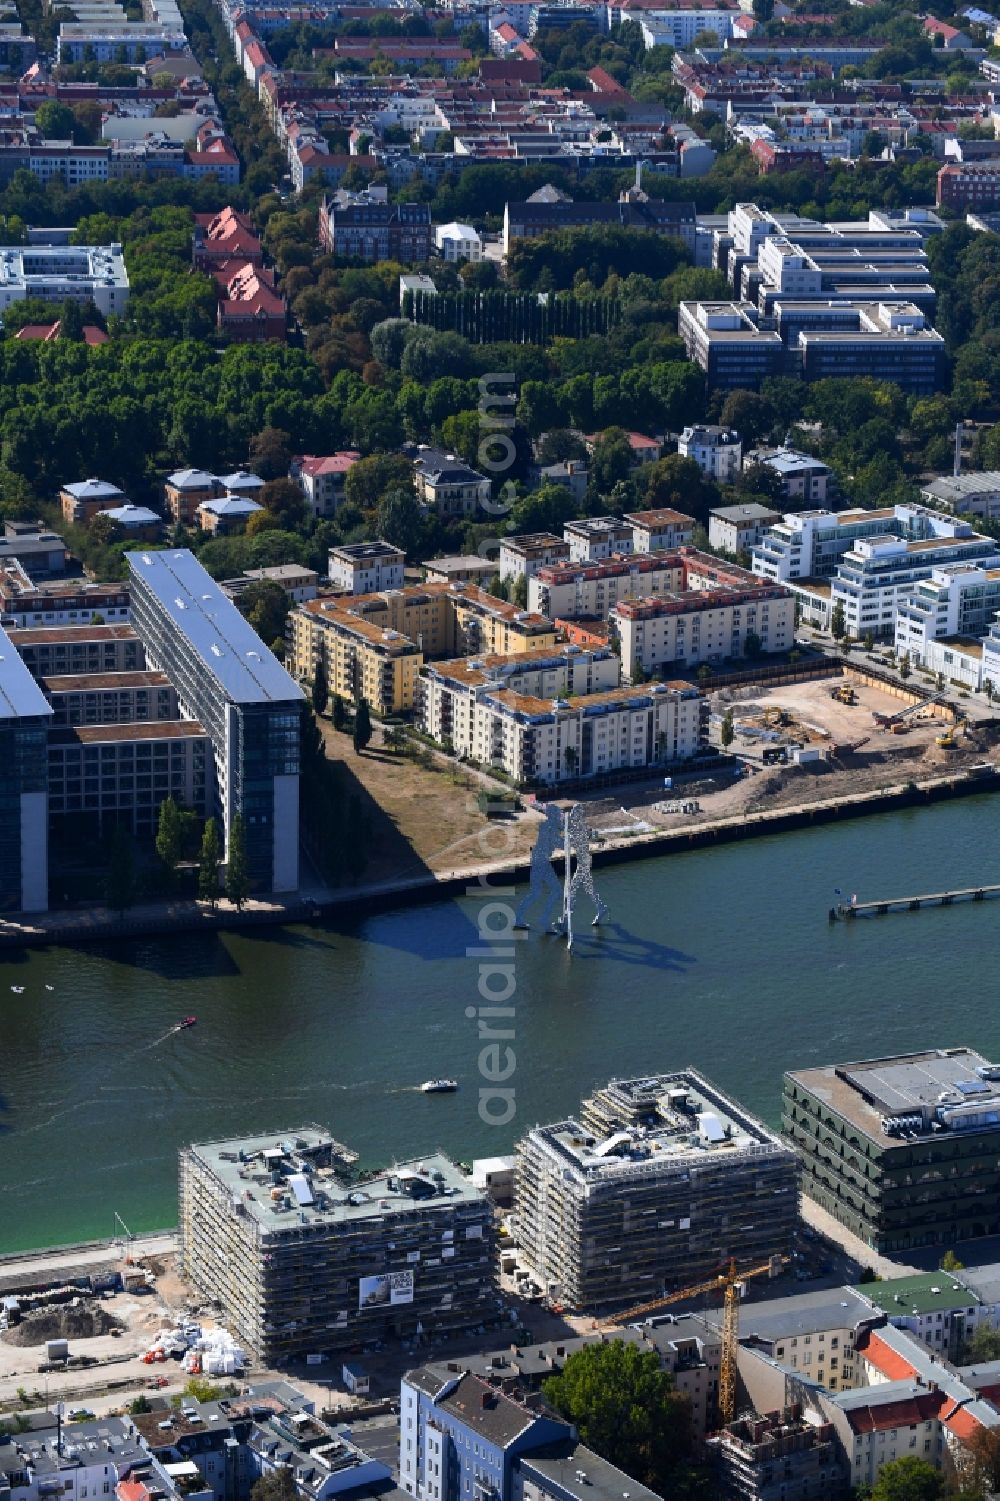 Berlin from the bird's eye view: Construction site to build a new multi-family residential complex WAVE WATERSIDE LIVING BERLIN on the former Osthafen port on Stralauer Allee in the district Friedrichshain in Berlin, Germany